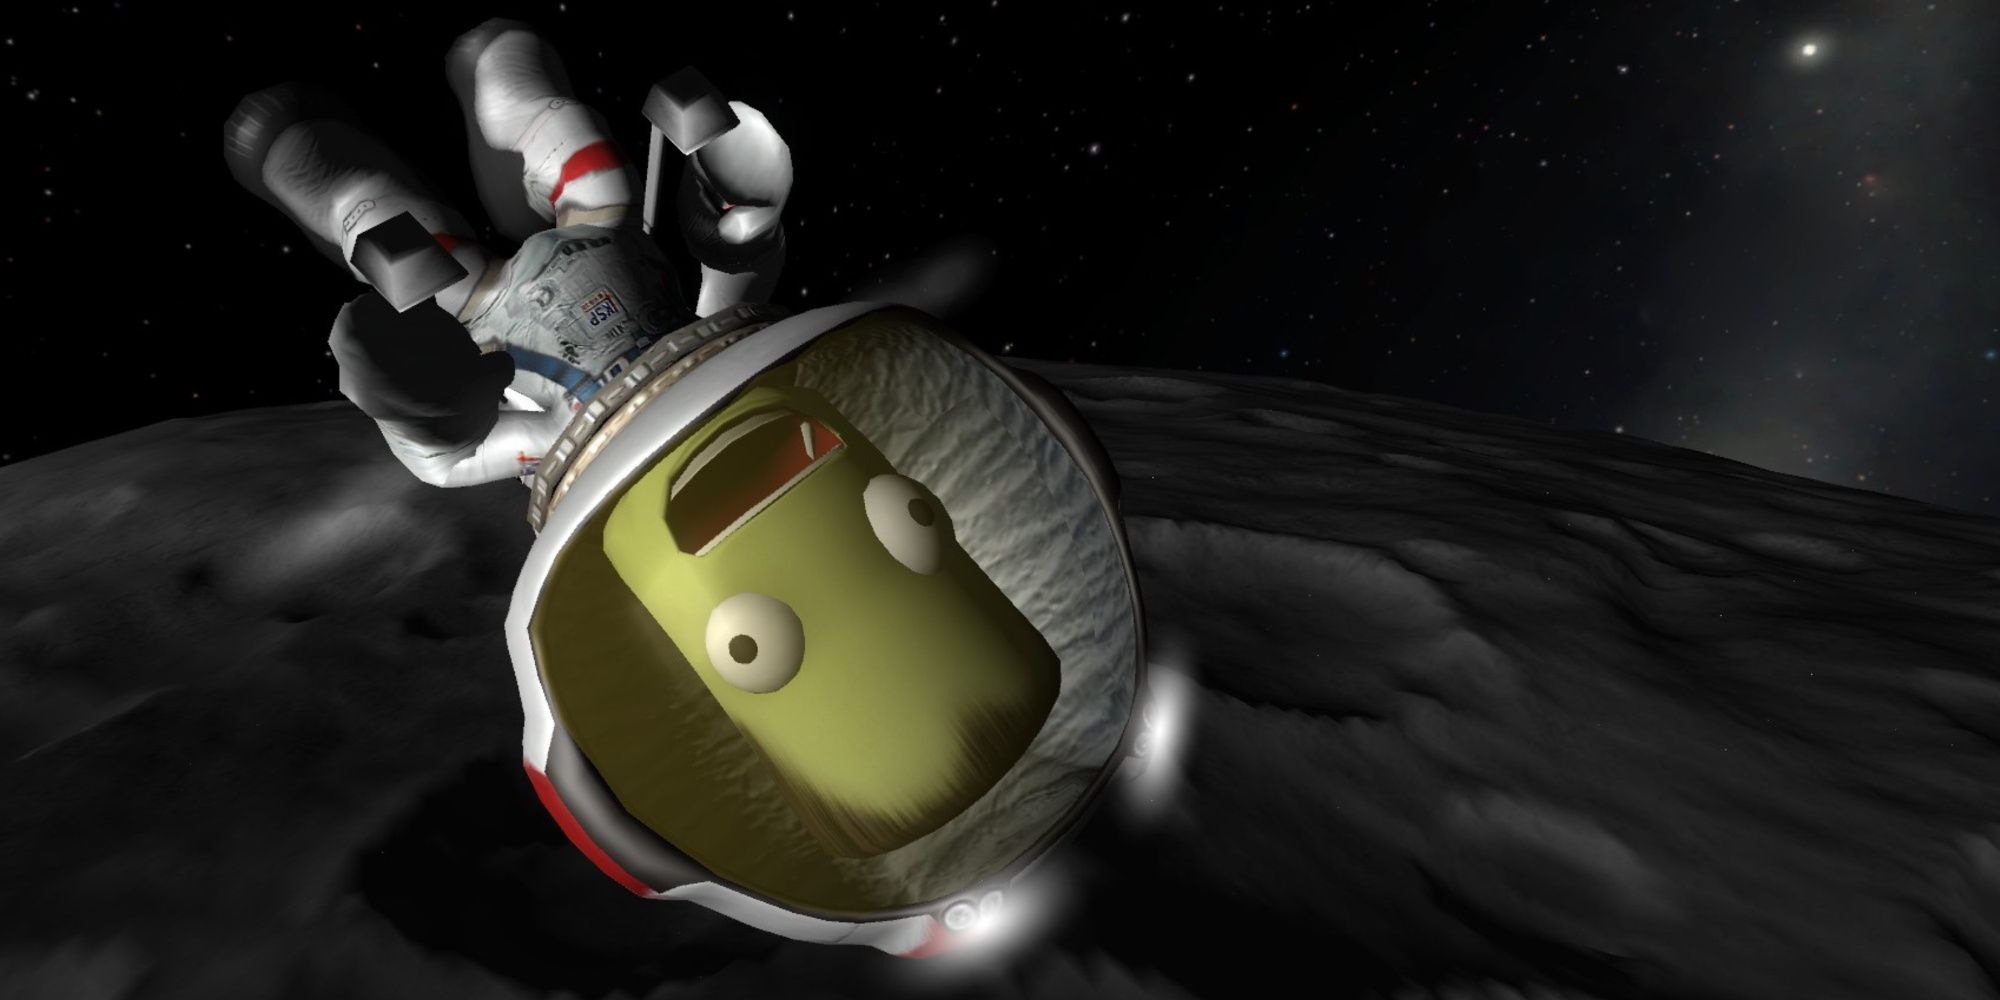 Kerbal Space Program brings the laws of physics to space exploration